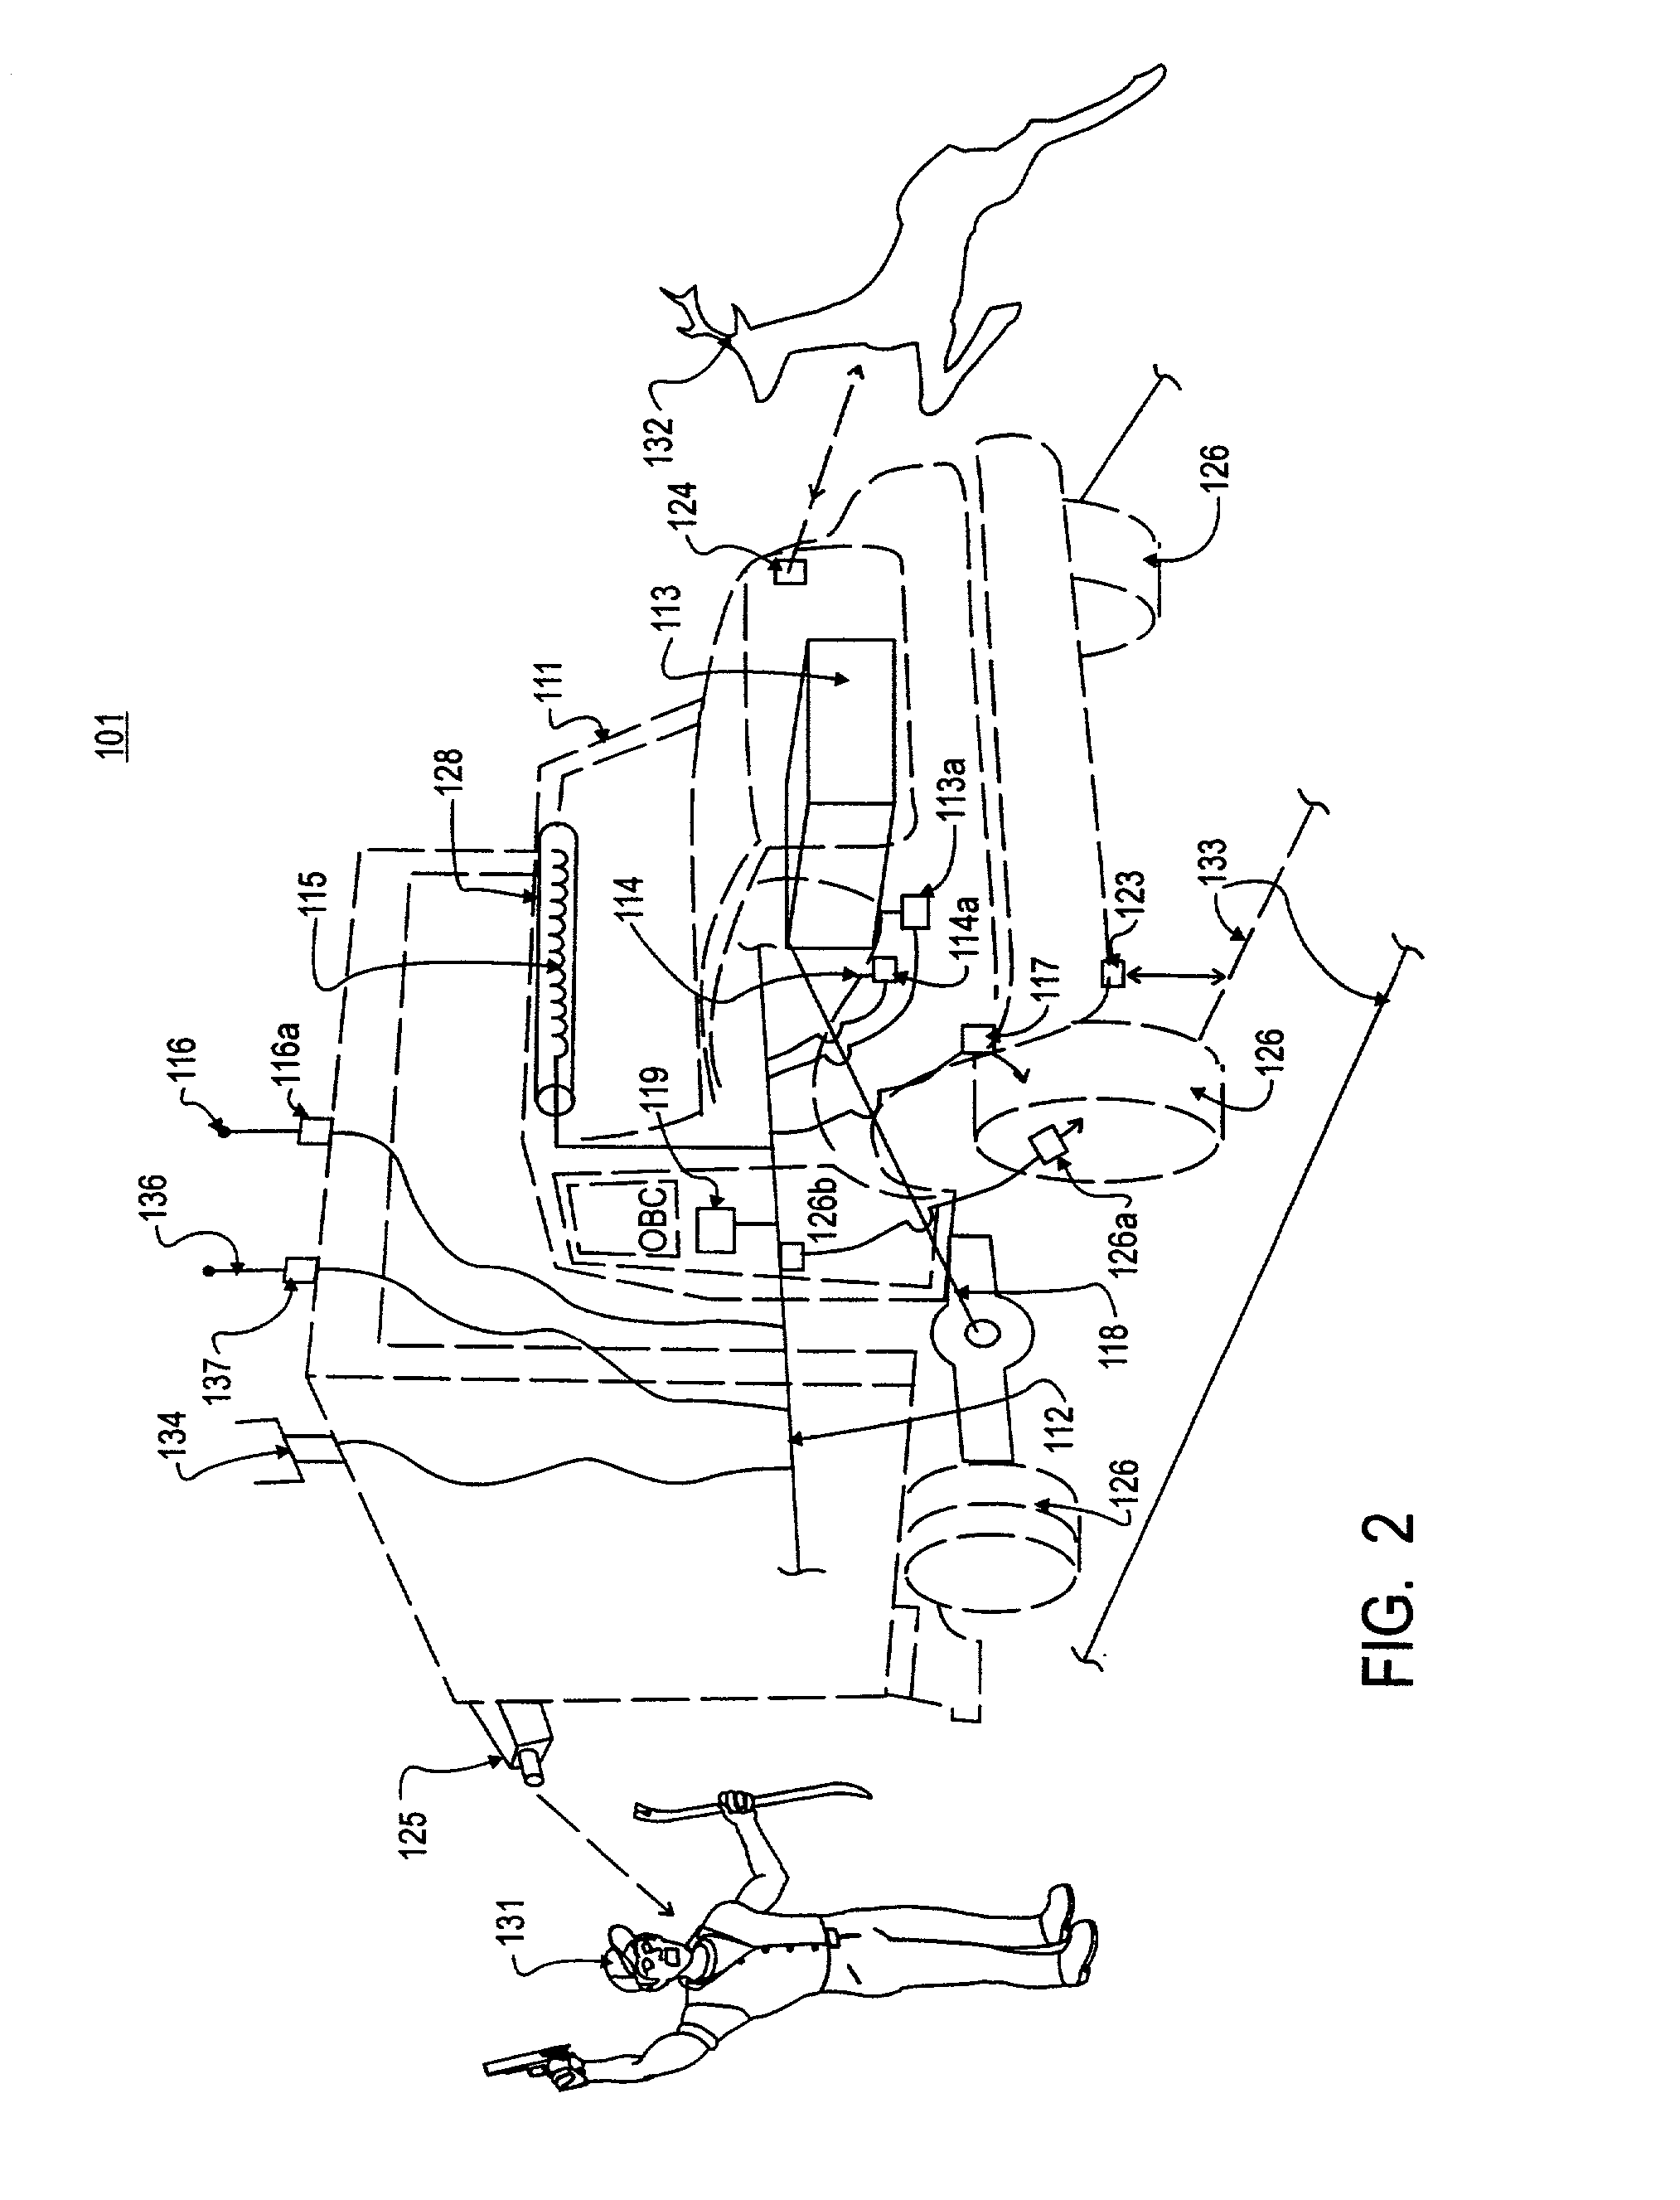 Land vehicle communications system and process for providing information and coordinating vehicle activities